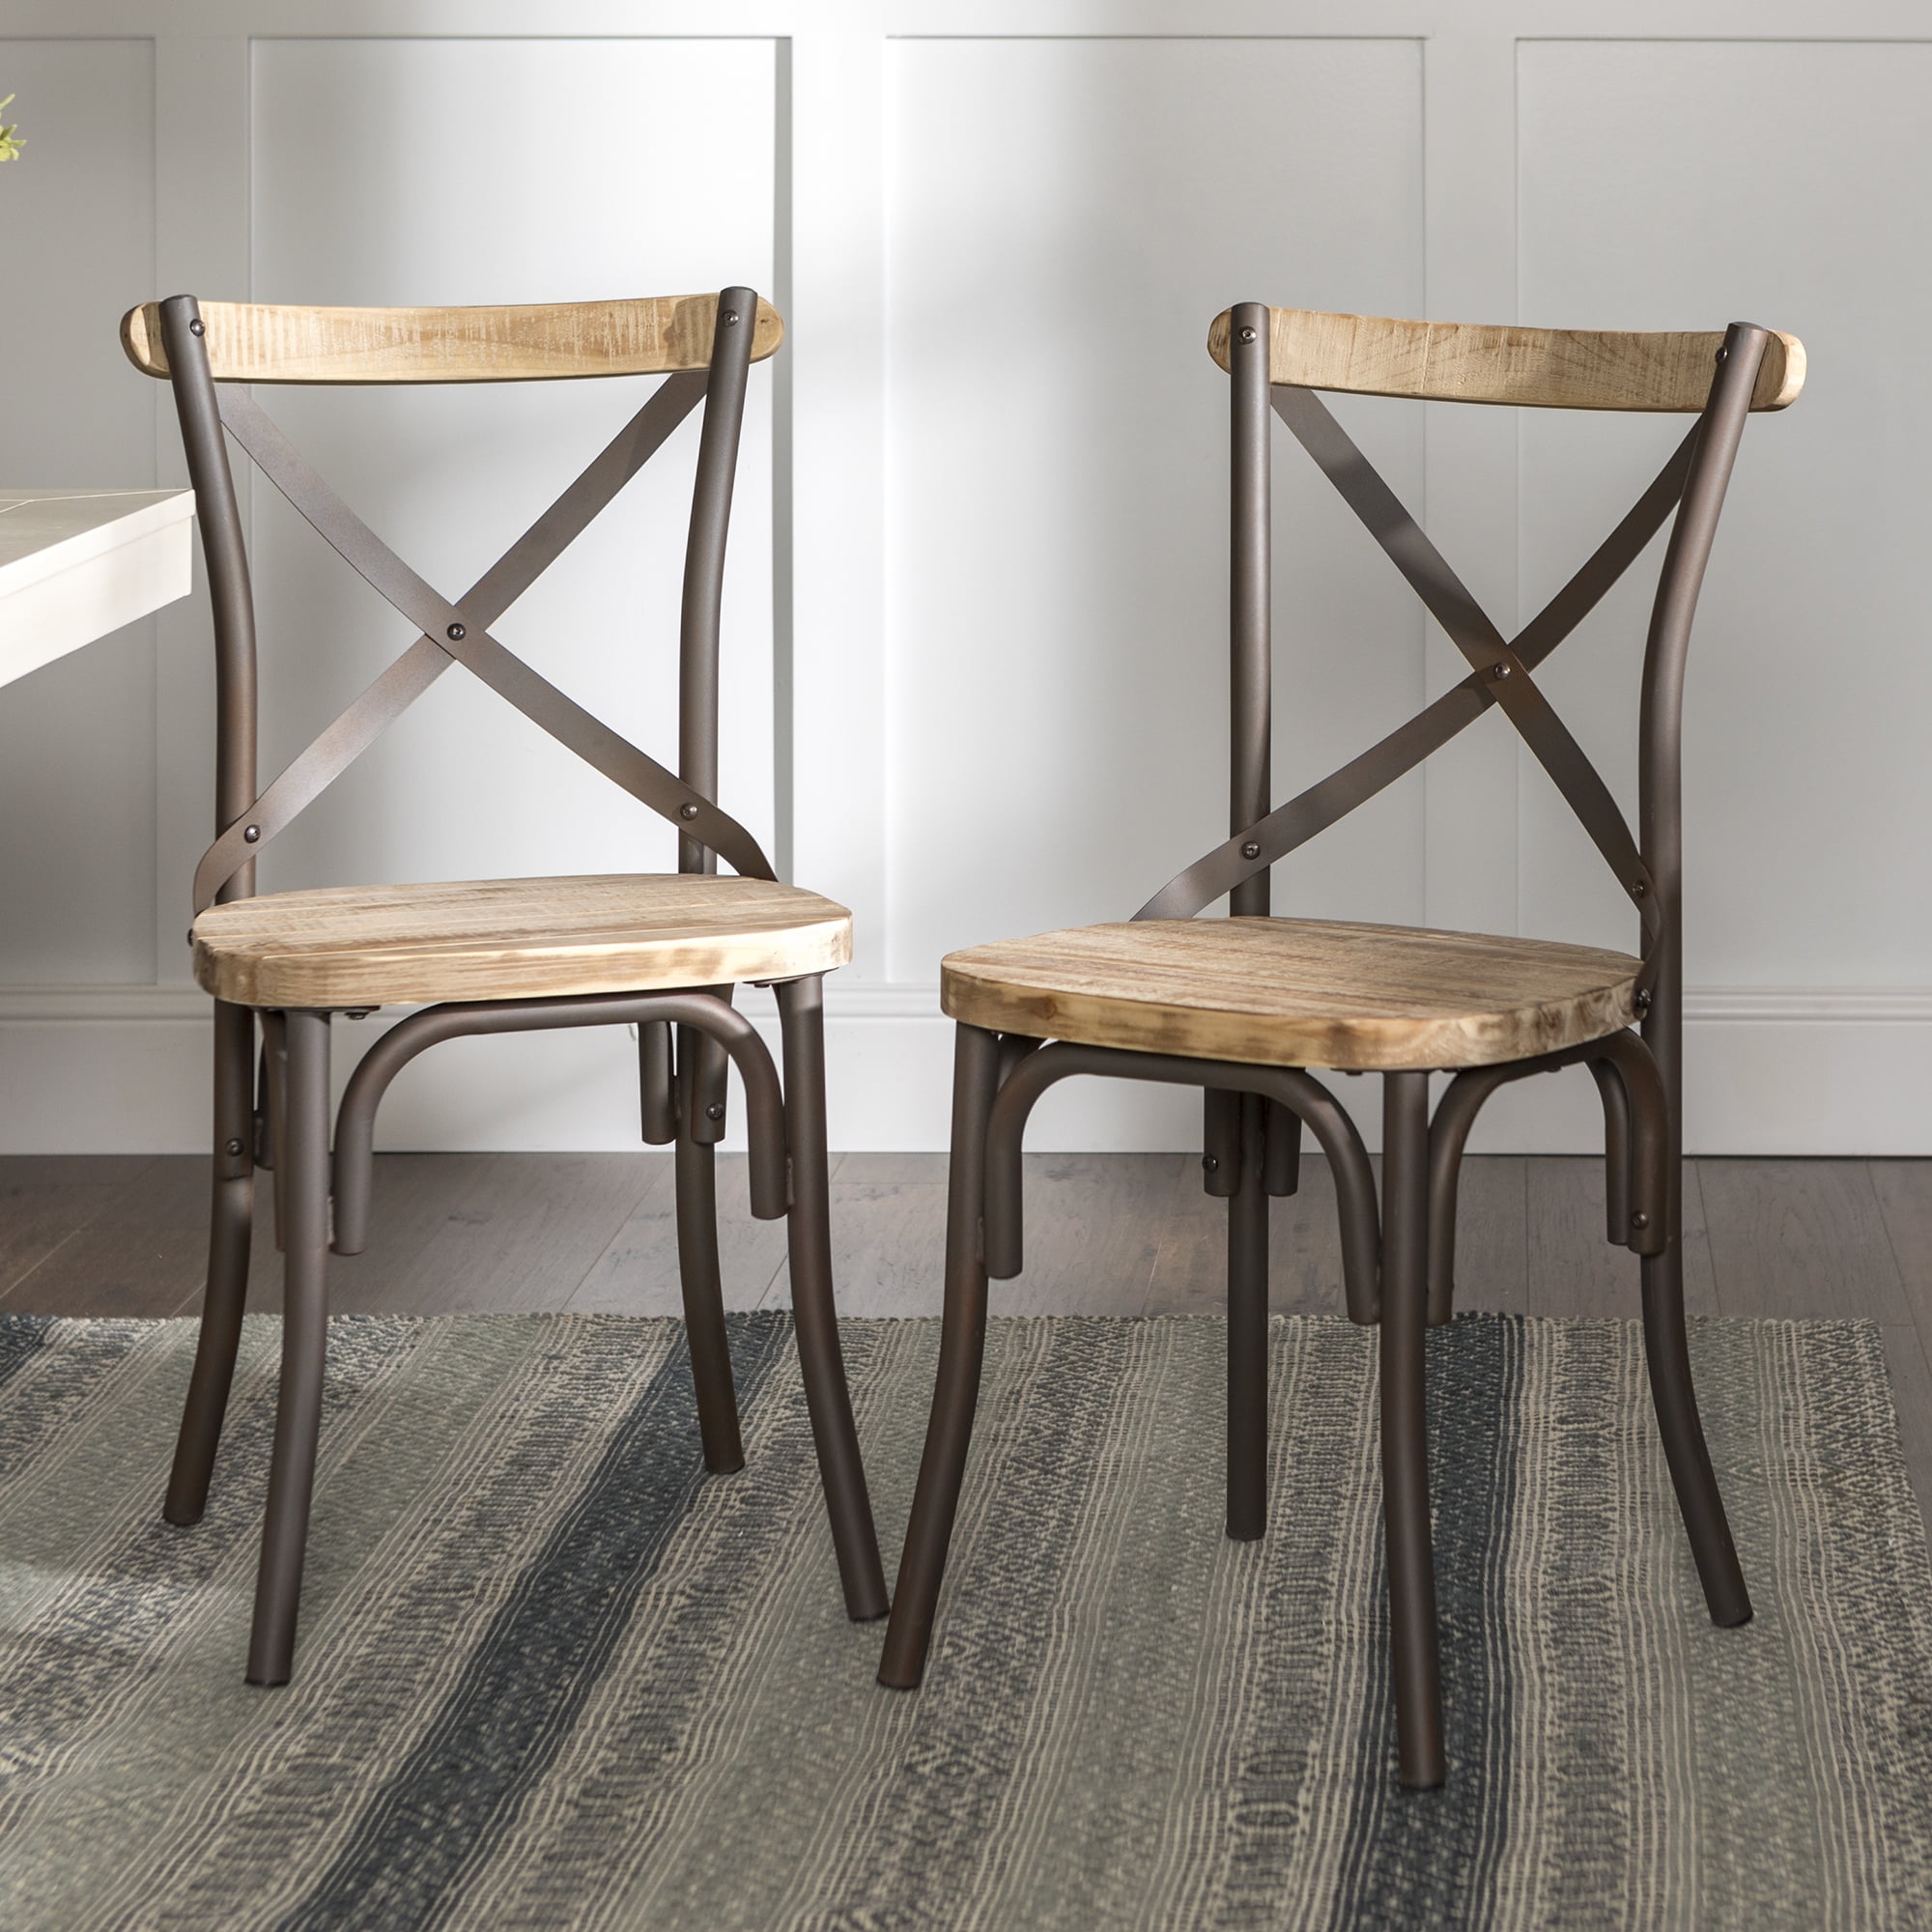 Woven Paths Rustic Solid Wood and Metal Dining Chairs, Set of 2